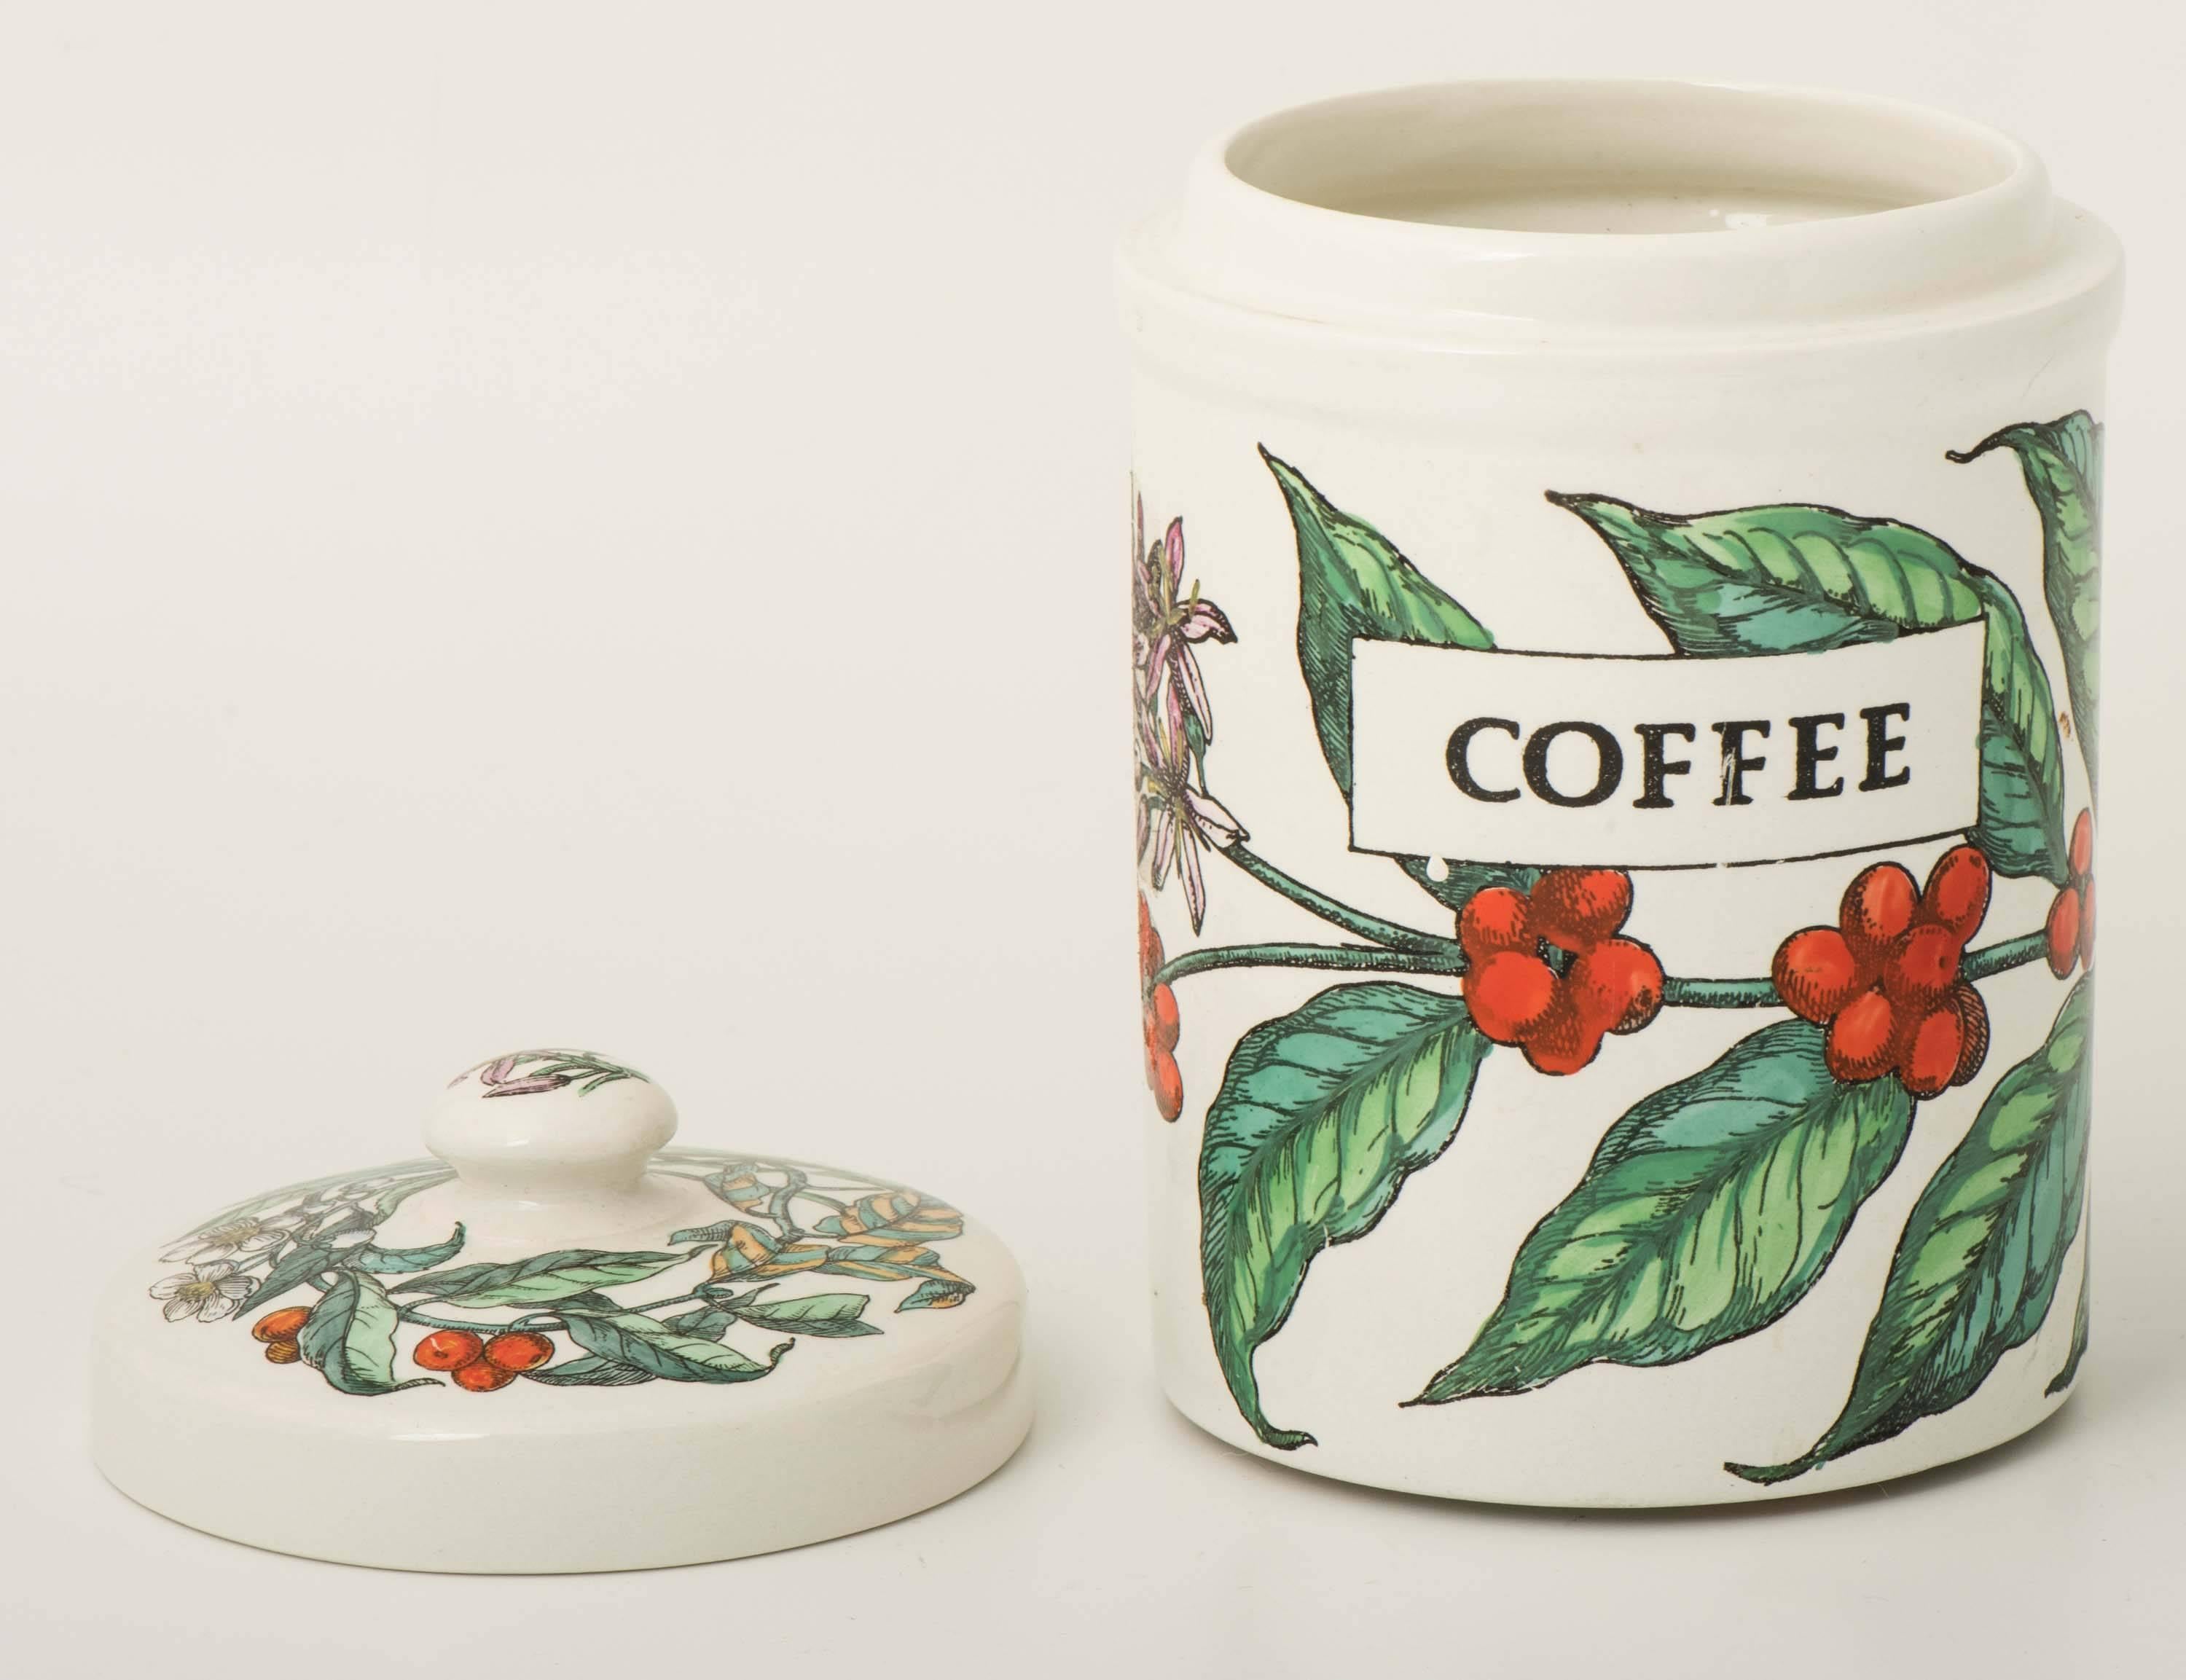 An early porcelain jar with cover by Piero Fornasetti.
“Coffee.”
Lithographically printed and hand-painted.
Mark to base.
Dimension: 17.5 cm high x 11 cm diameter.
Italy, circa 1960.
   